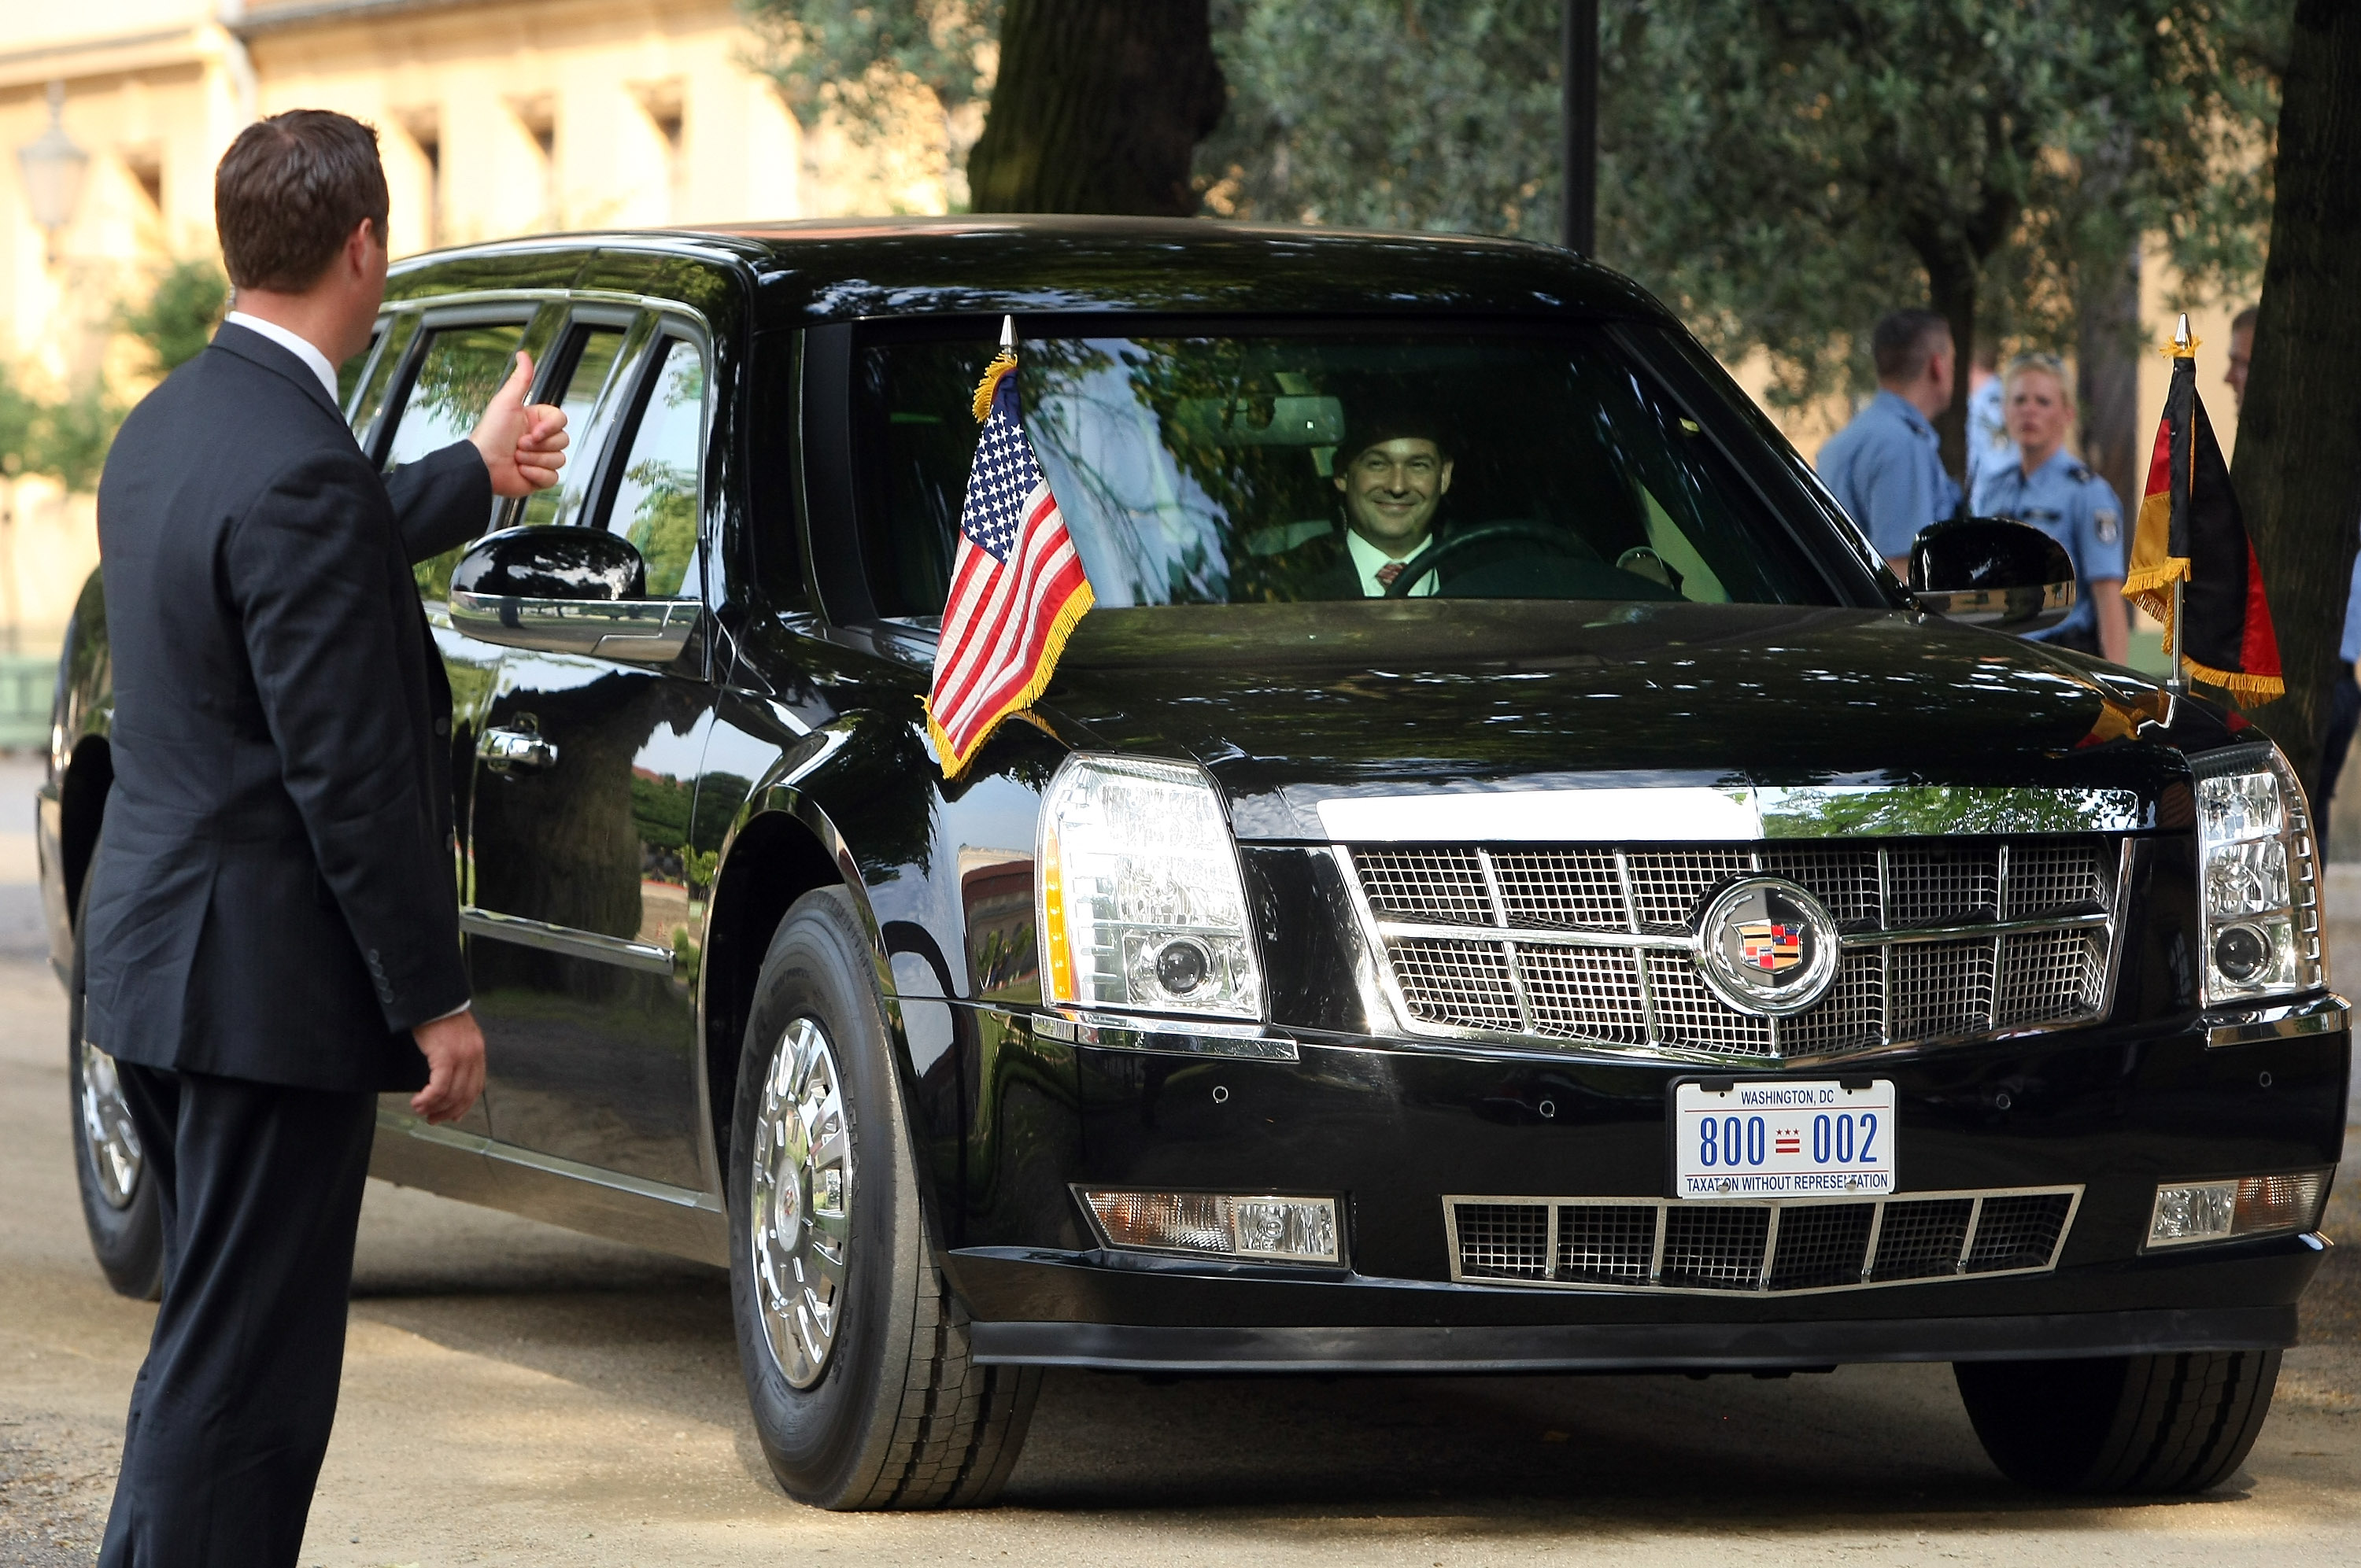 A security officer gives a thumbs-up to the driver of 'The Beast,' a modified Cadillac DTS that is the current U.S. presidential limousine, after U.S. President Barack Obama exited it for a dinner at the Orangerie at Schloss Charlottenburg palace on June 19, 2013 in Berlin. (Adam Berry—Getty Images)